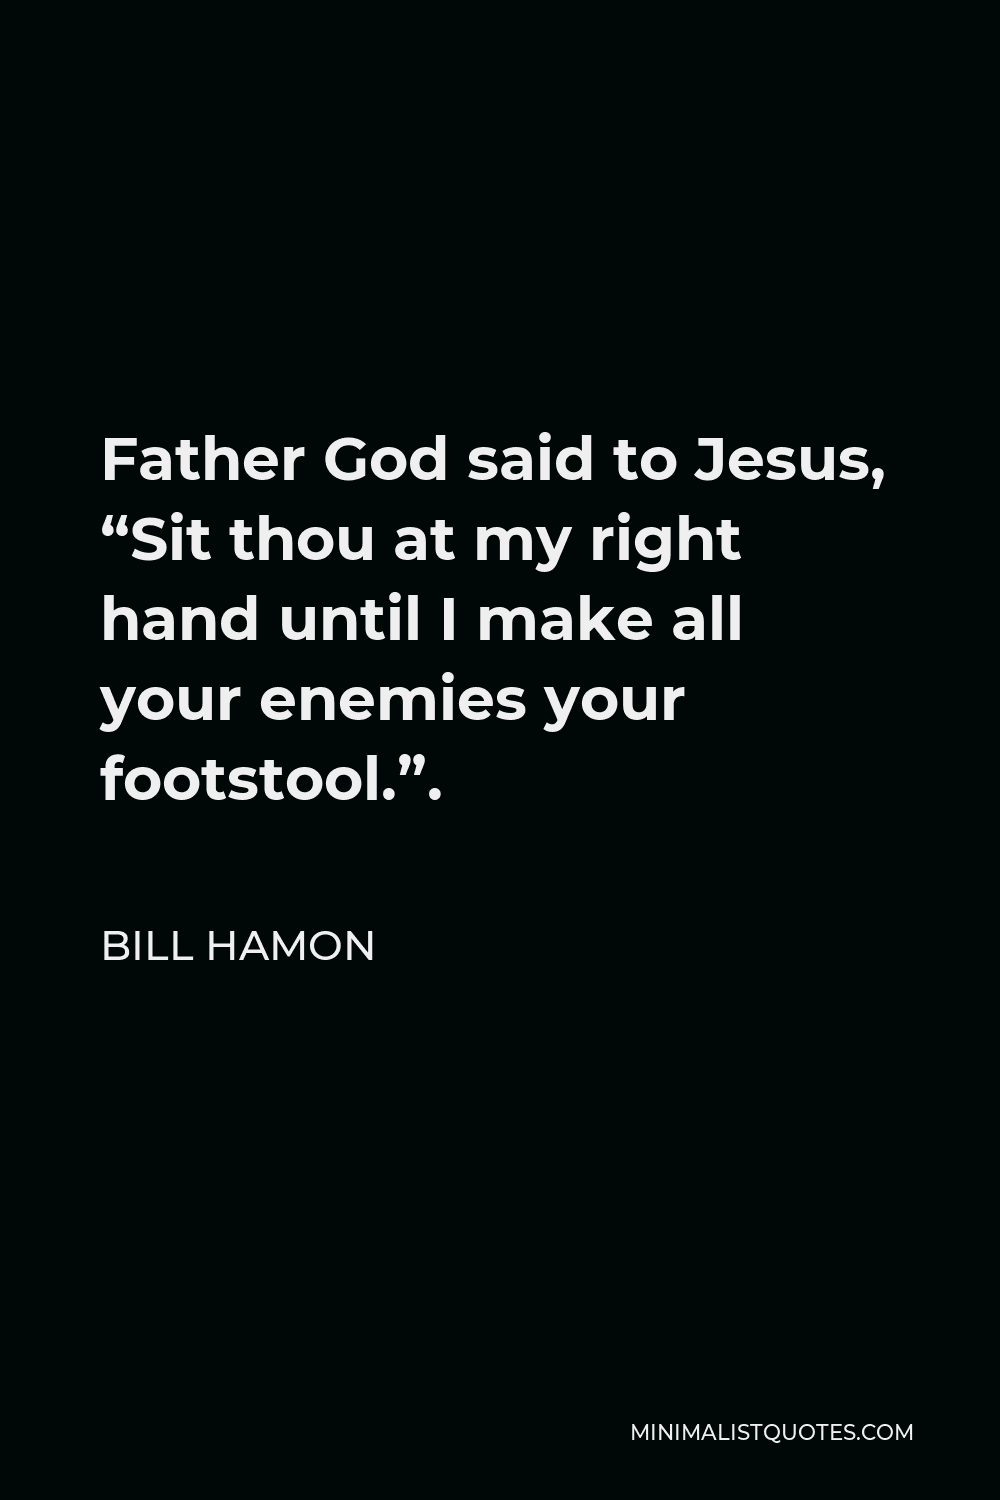 Bill Hamon Quote - Father God said to Jesus, “Sit thou at my right hand until I make all your enemies your footstool.”.